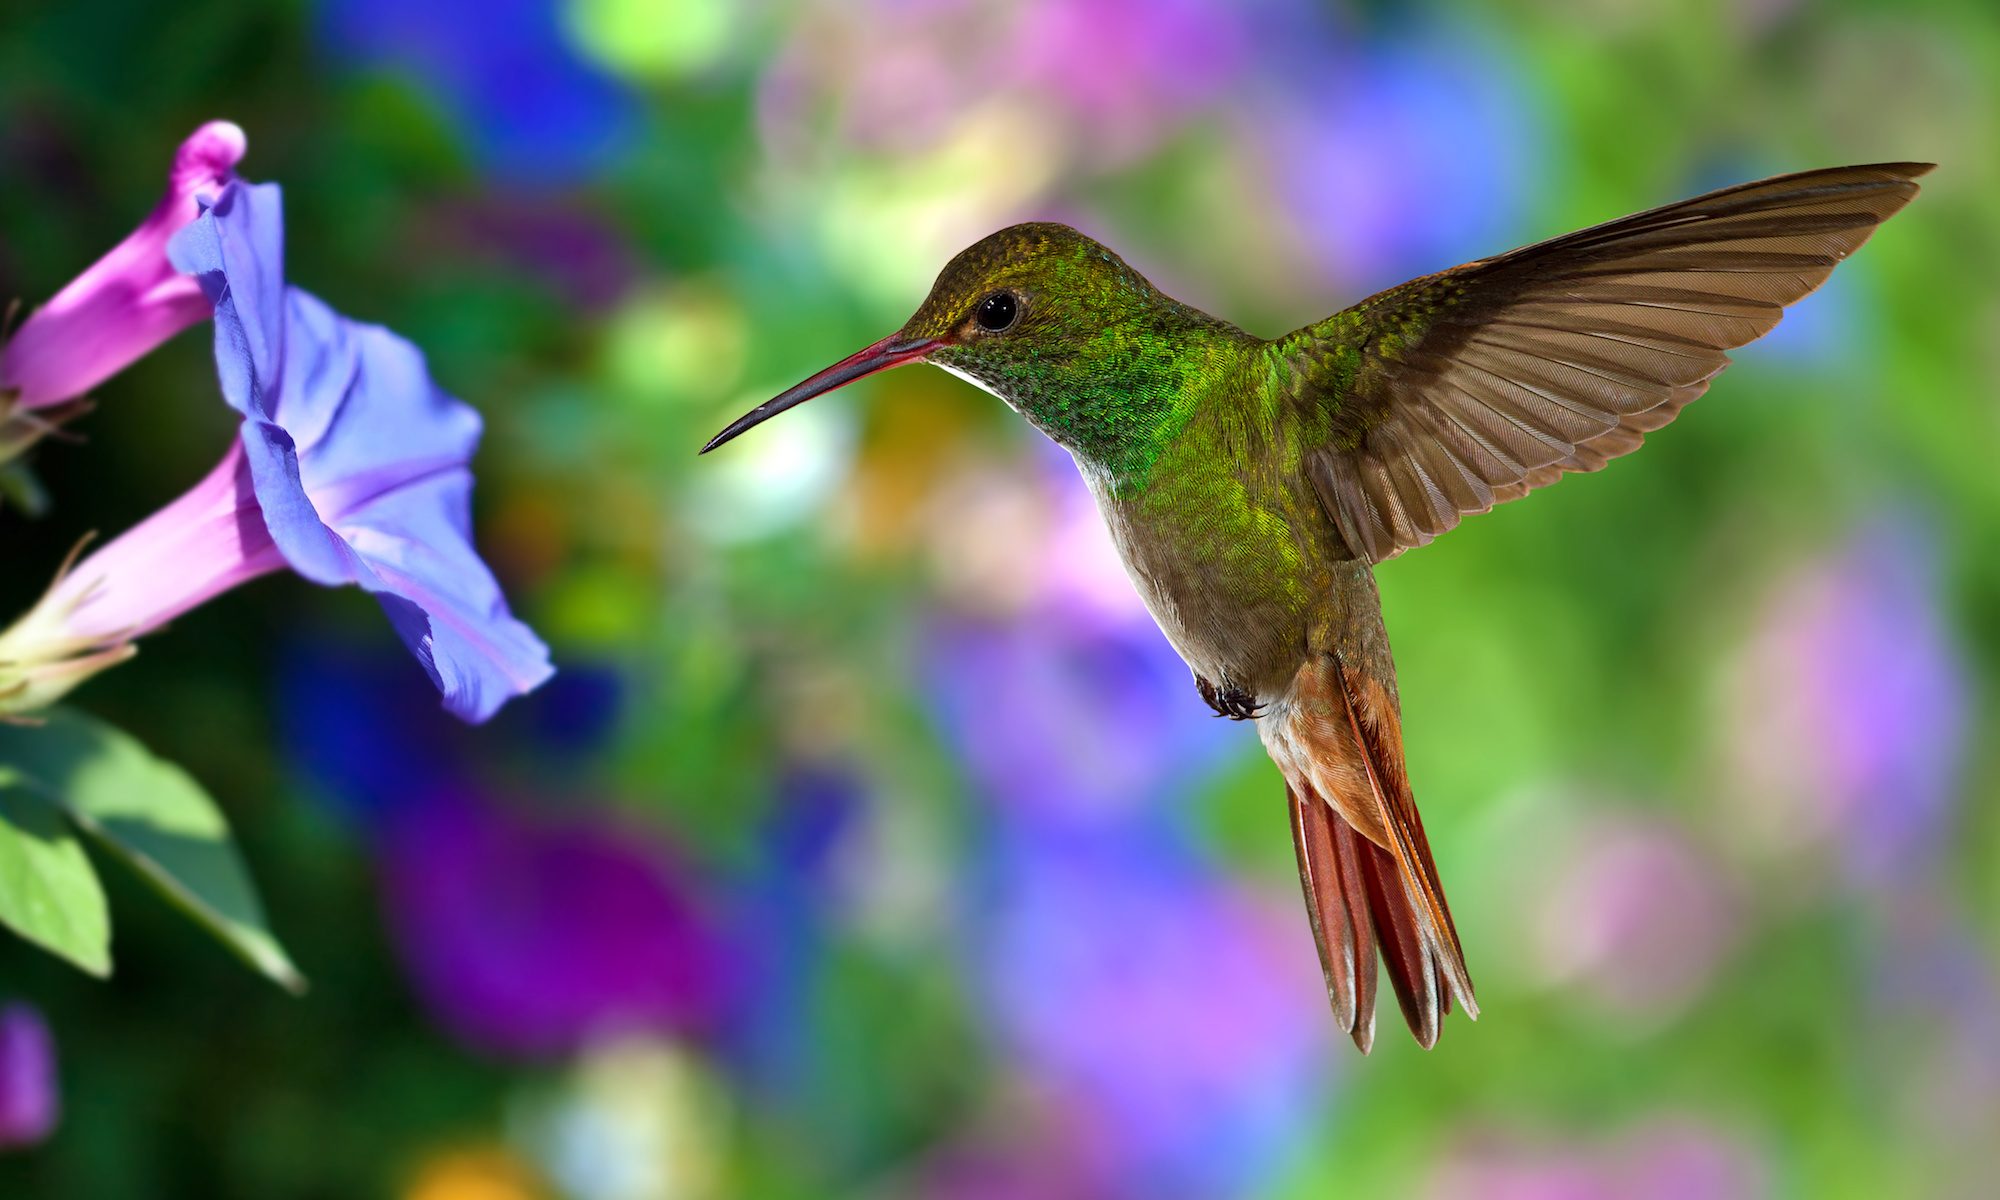 hummingbird hovers by flower